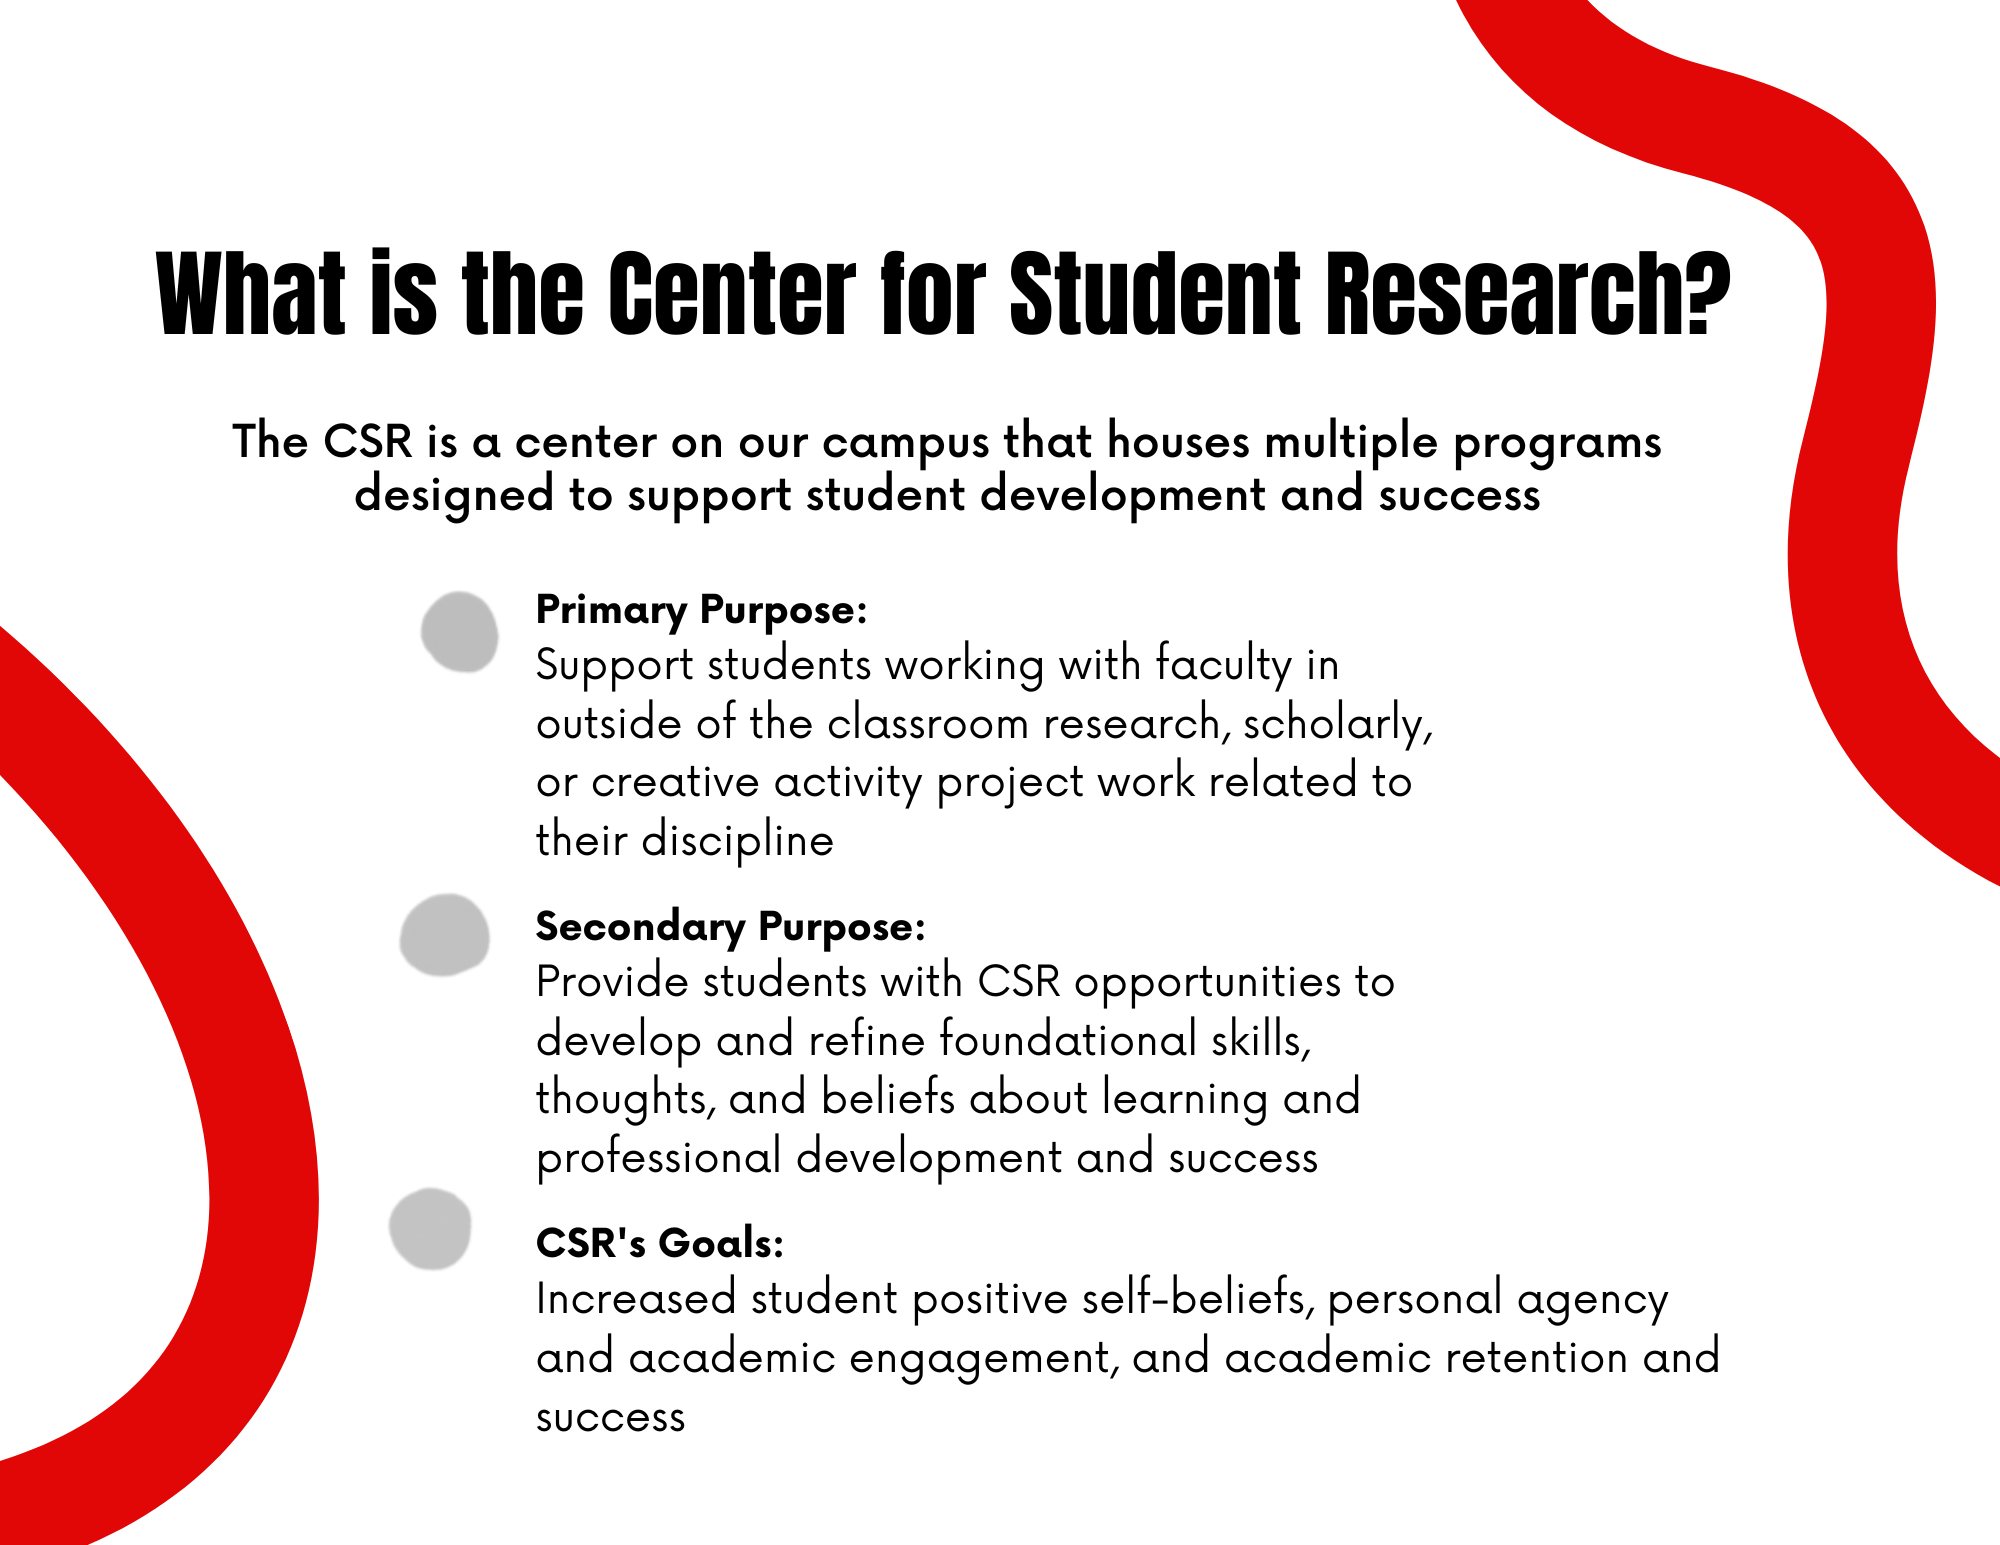 What is the Center for Student Research? The CSR is a center on our campus that houses multiple programs designed to support student development and success. Primary Purpose: Support students working with faculty in outside of the classroom research, scholarly, or creative activity project work related to their discipline. Secondary Purpose: Provide students with CSR opportunities to develop and refine foundational skills, thoughts, and beliefs about learning and professional development and success. CSR's goals: Increased student positive self-beliefs, personal agency and academic engagement, and academic retention and success.